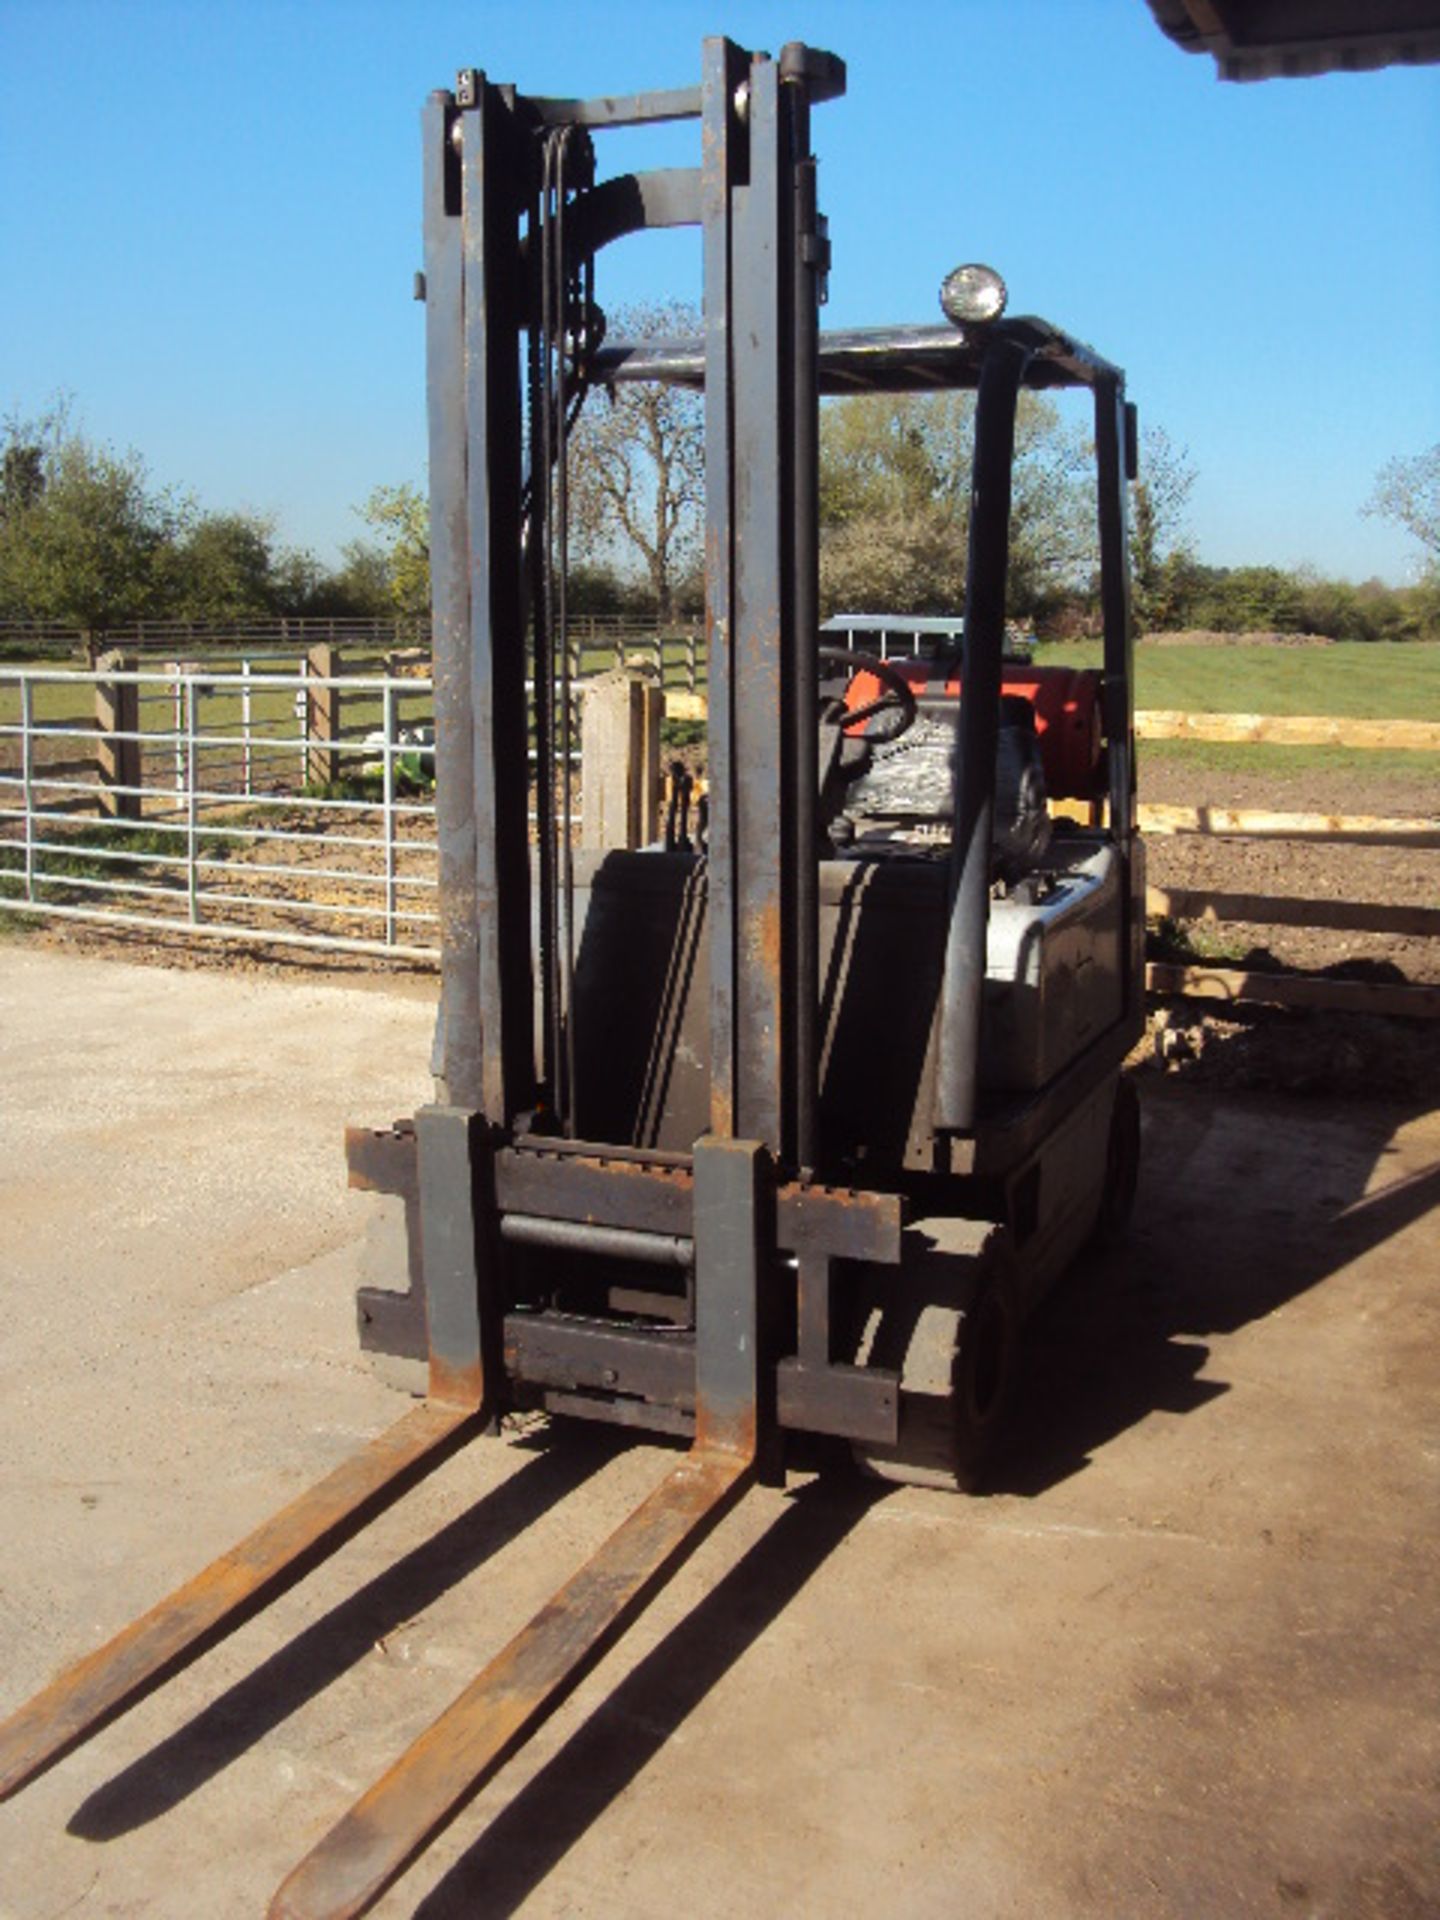 FIAT G20 2t gas driven forklift truck with duplex mast & side-shift (6351 rec hrs)(RDL) (This item - Image 3 of 5